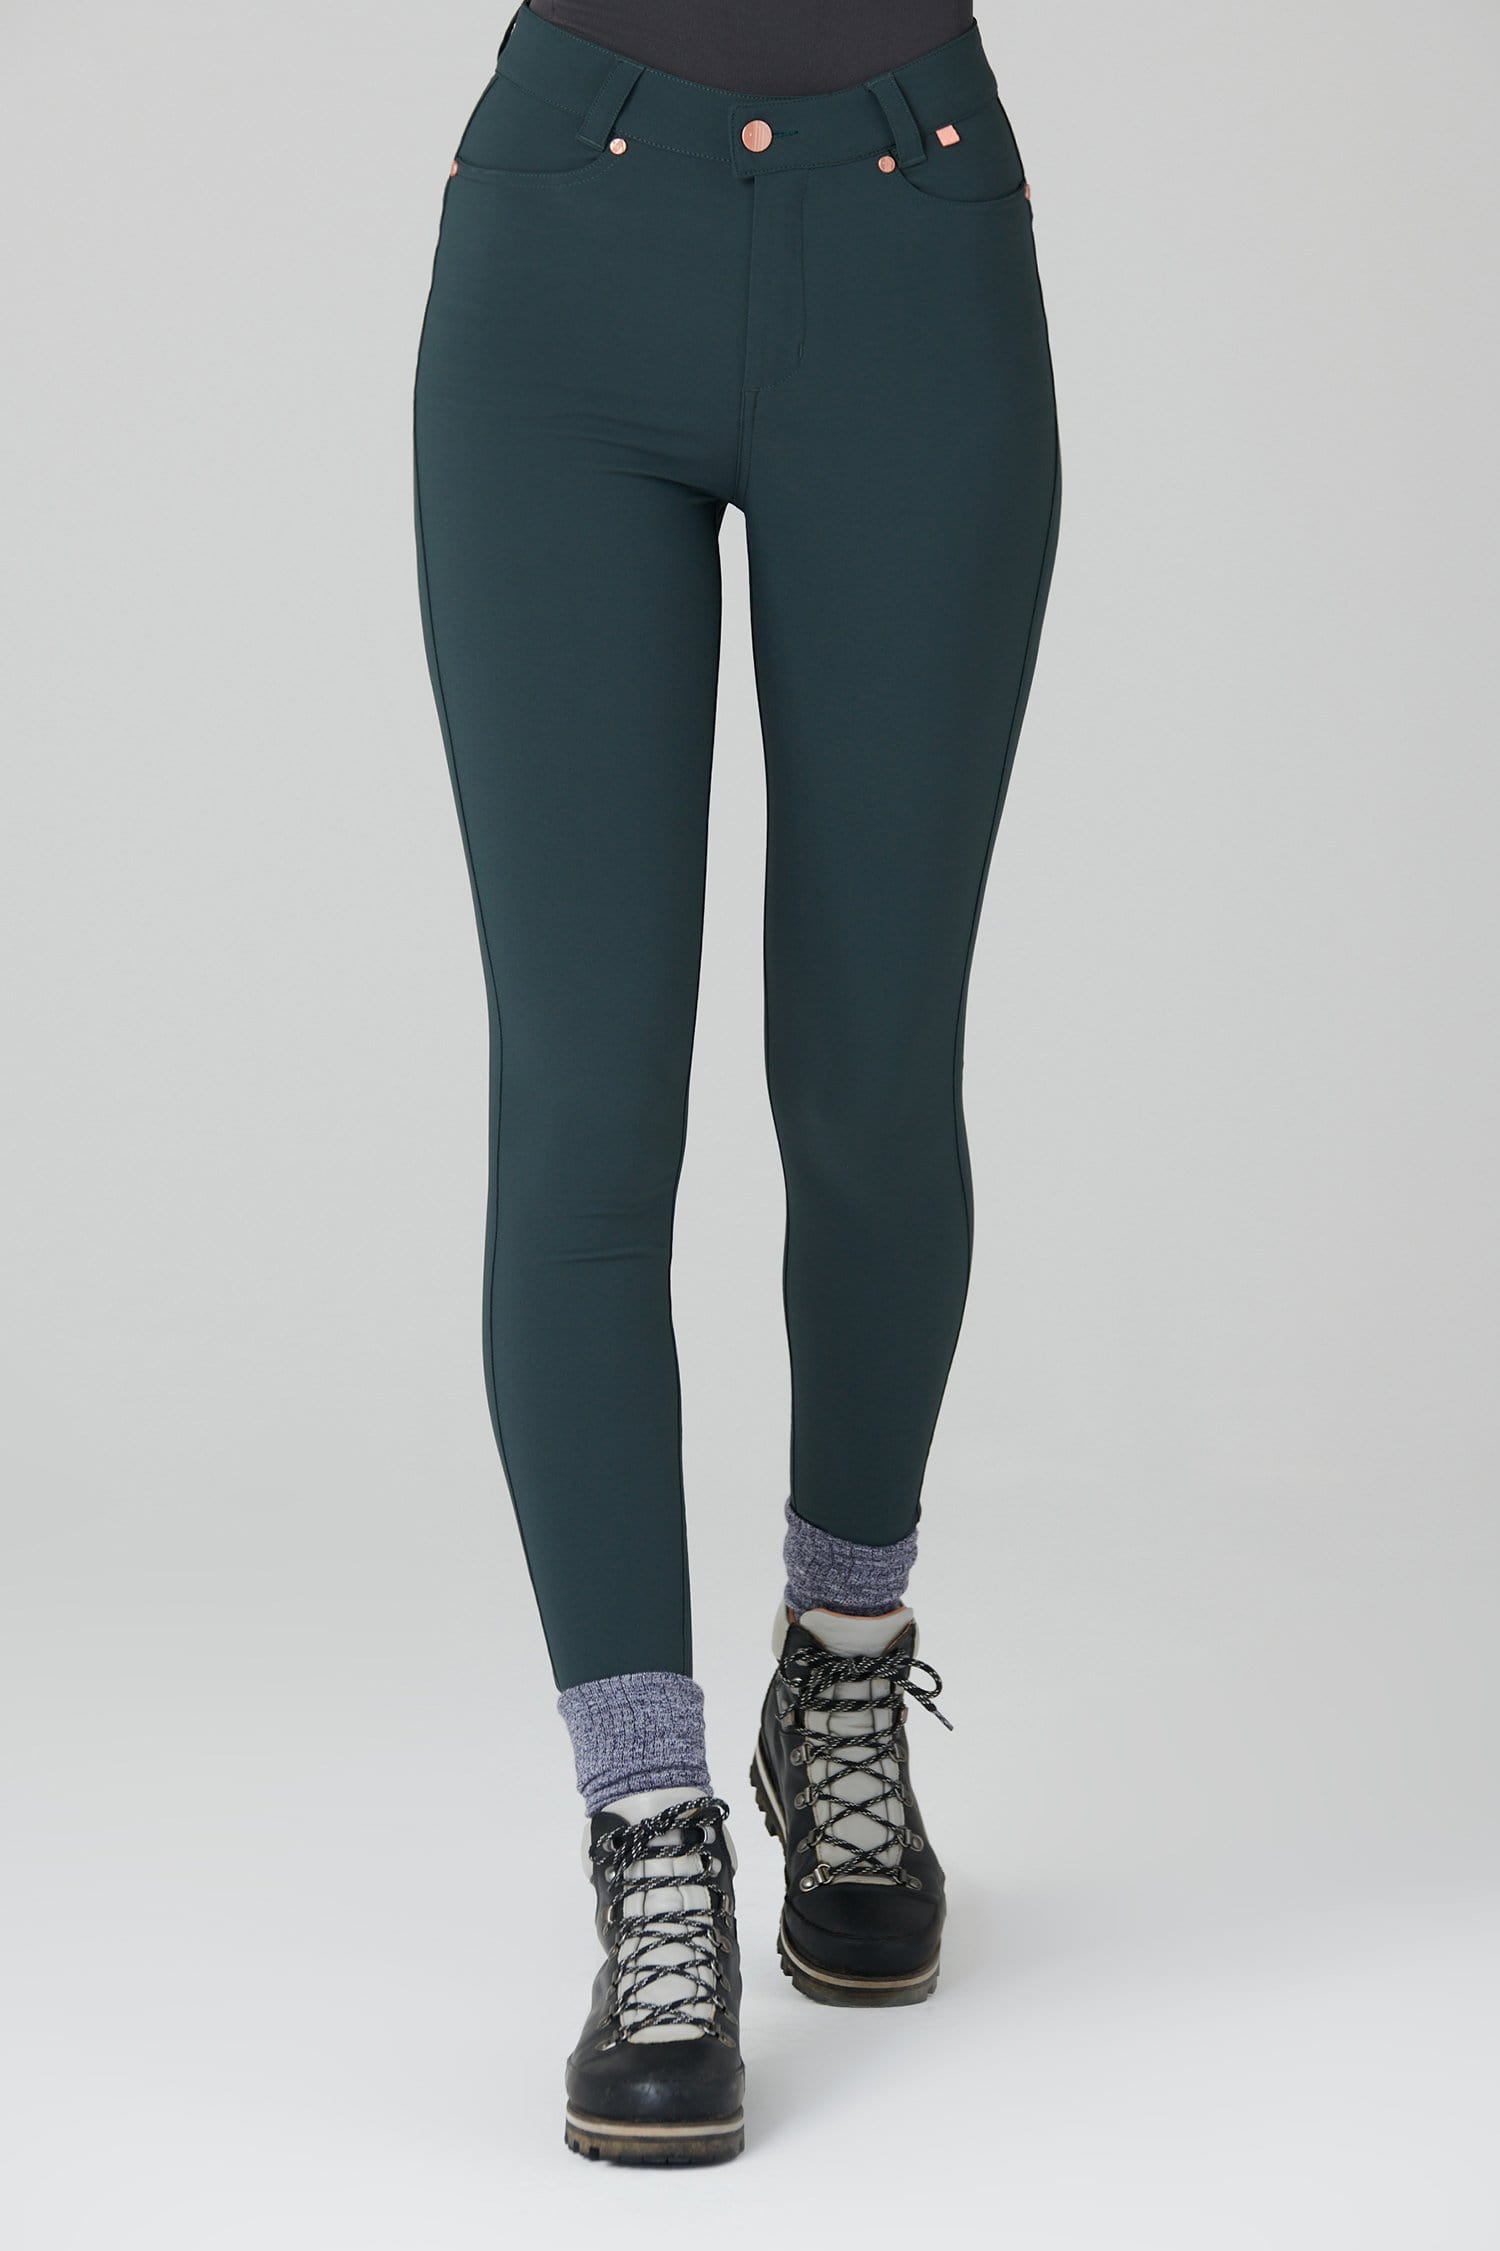 Thermal Skinny Outdoor Trousers - Forest Green - 36l / Uk18 - Womens - Acai Outdoorwear